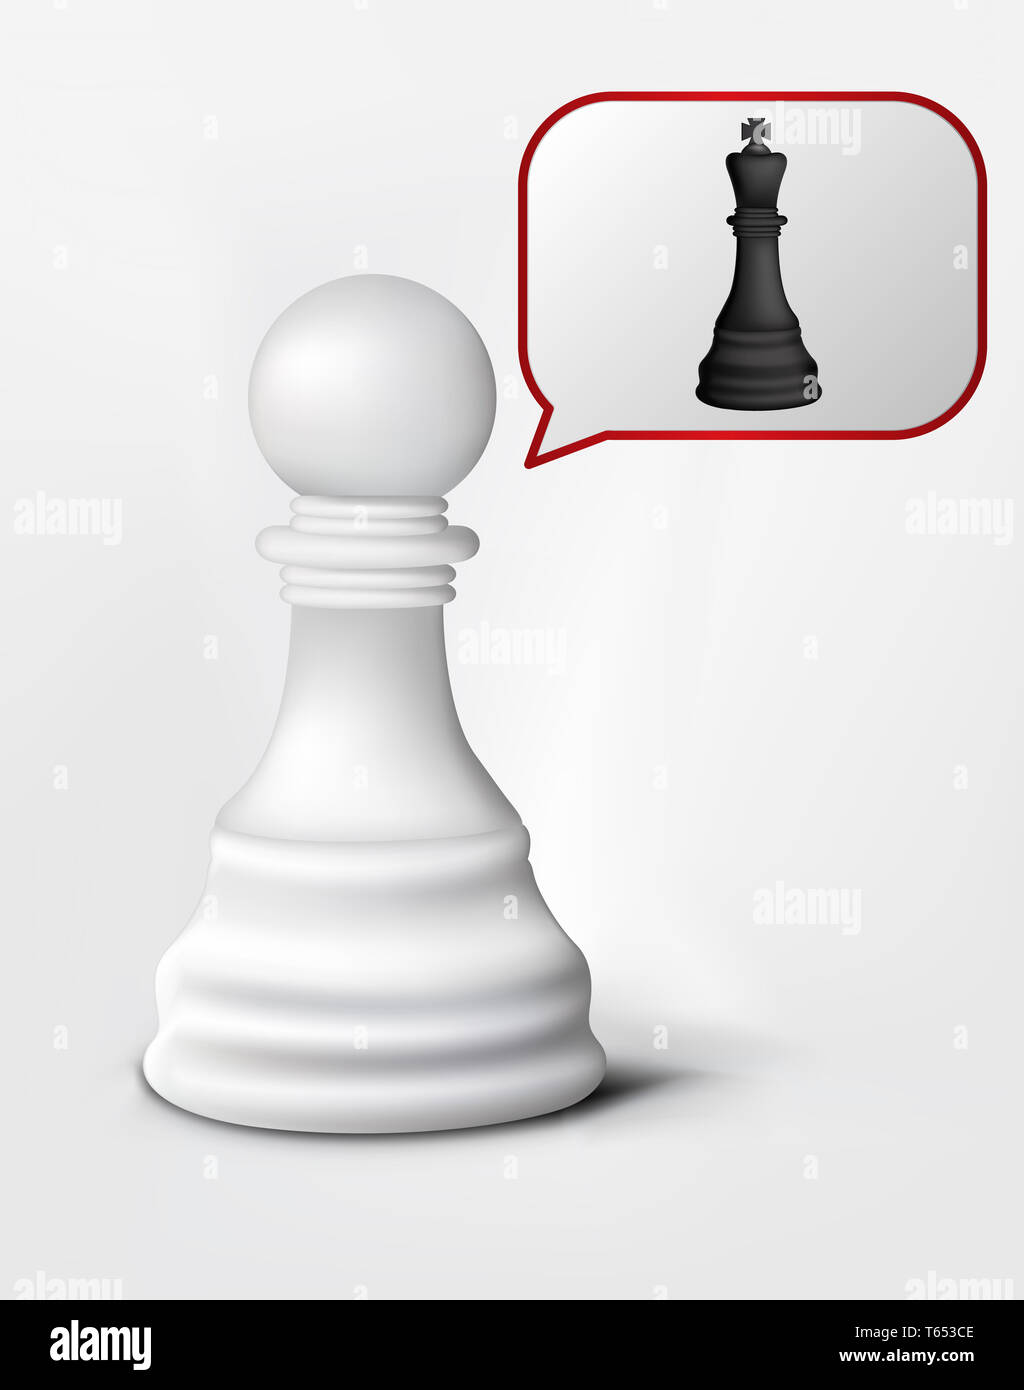 Chess Pawn and King Stock Photo